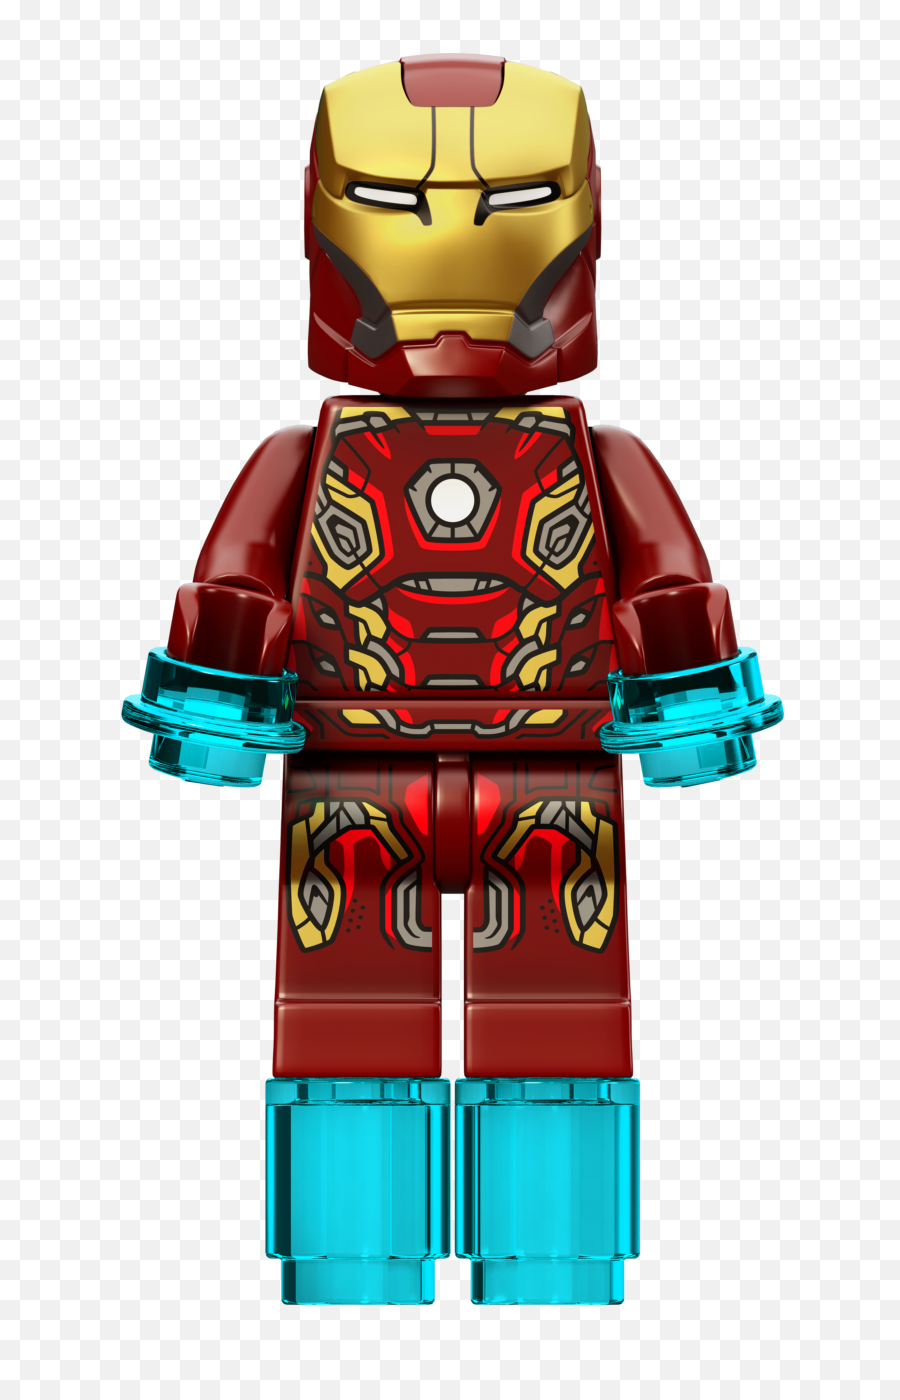 Another Age Of Ultron Iron Man Suit - Lego Avengers Age Of Ultron Iron Man Png,Lego Man Png